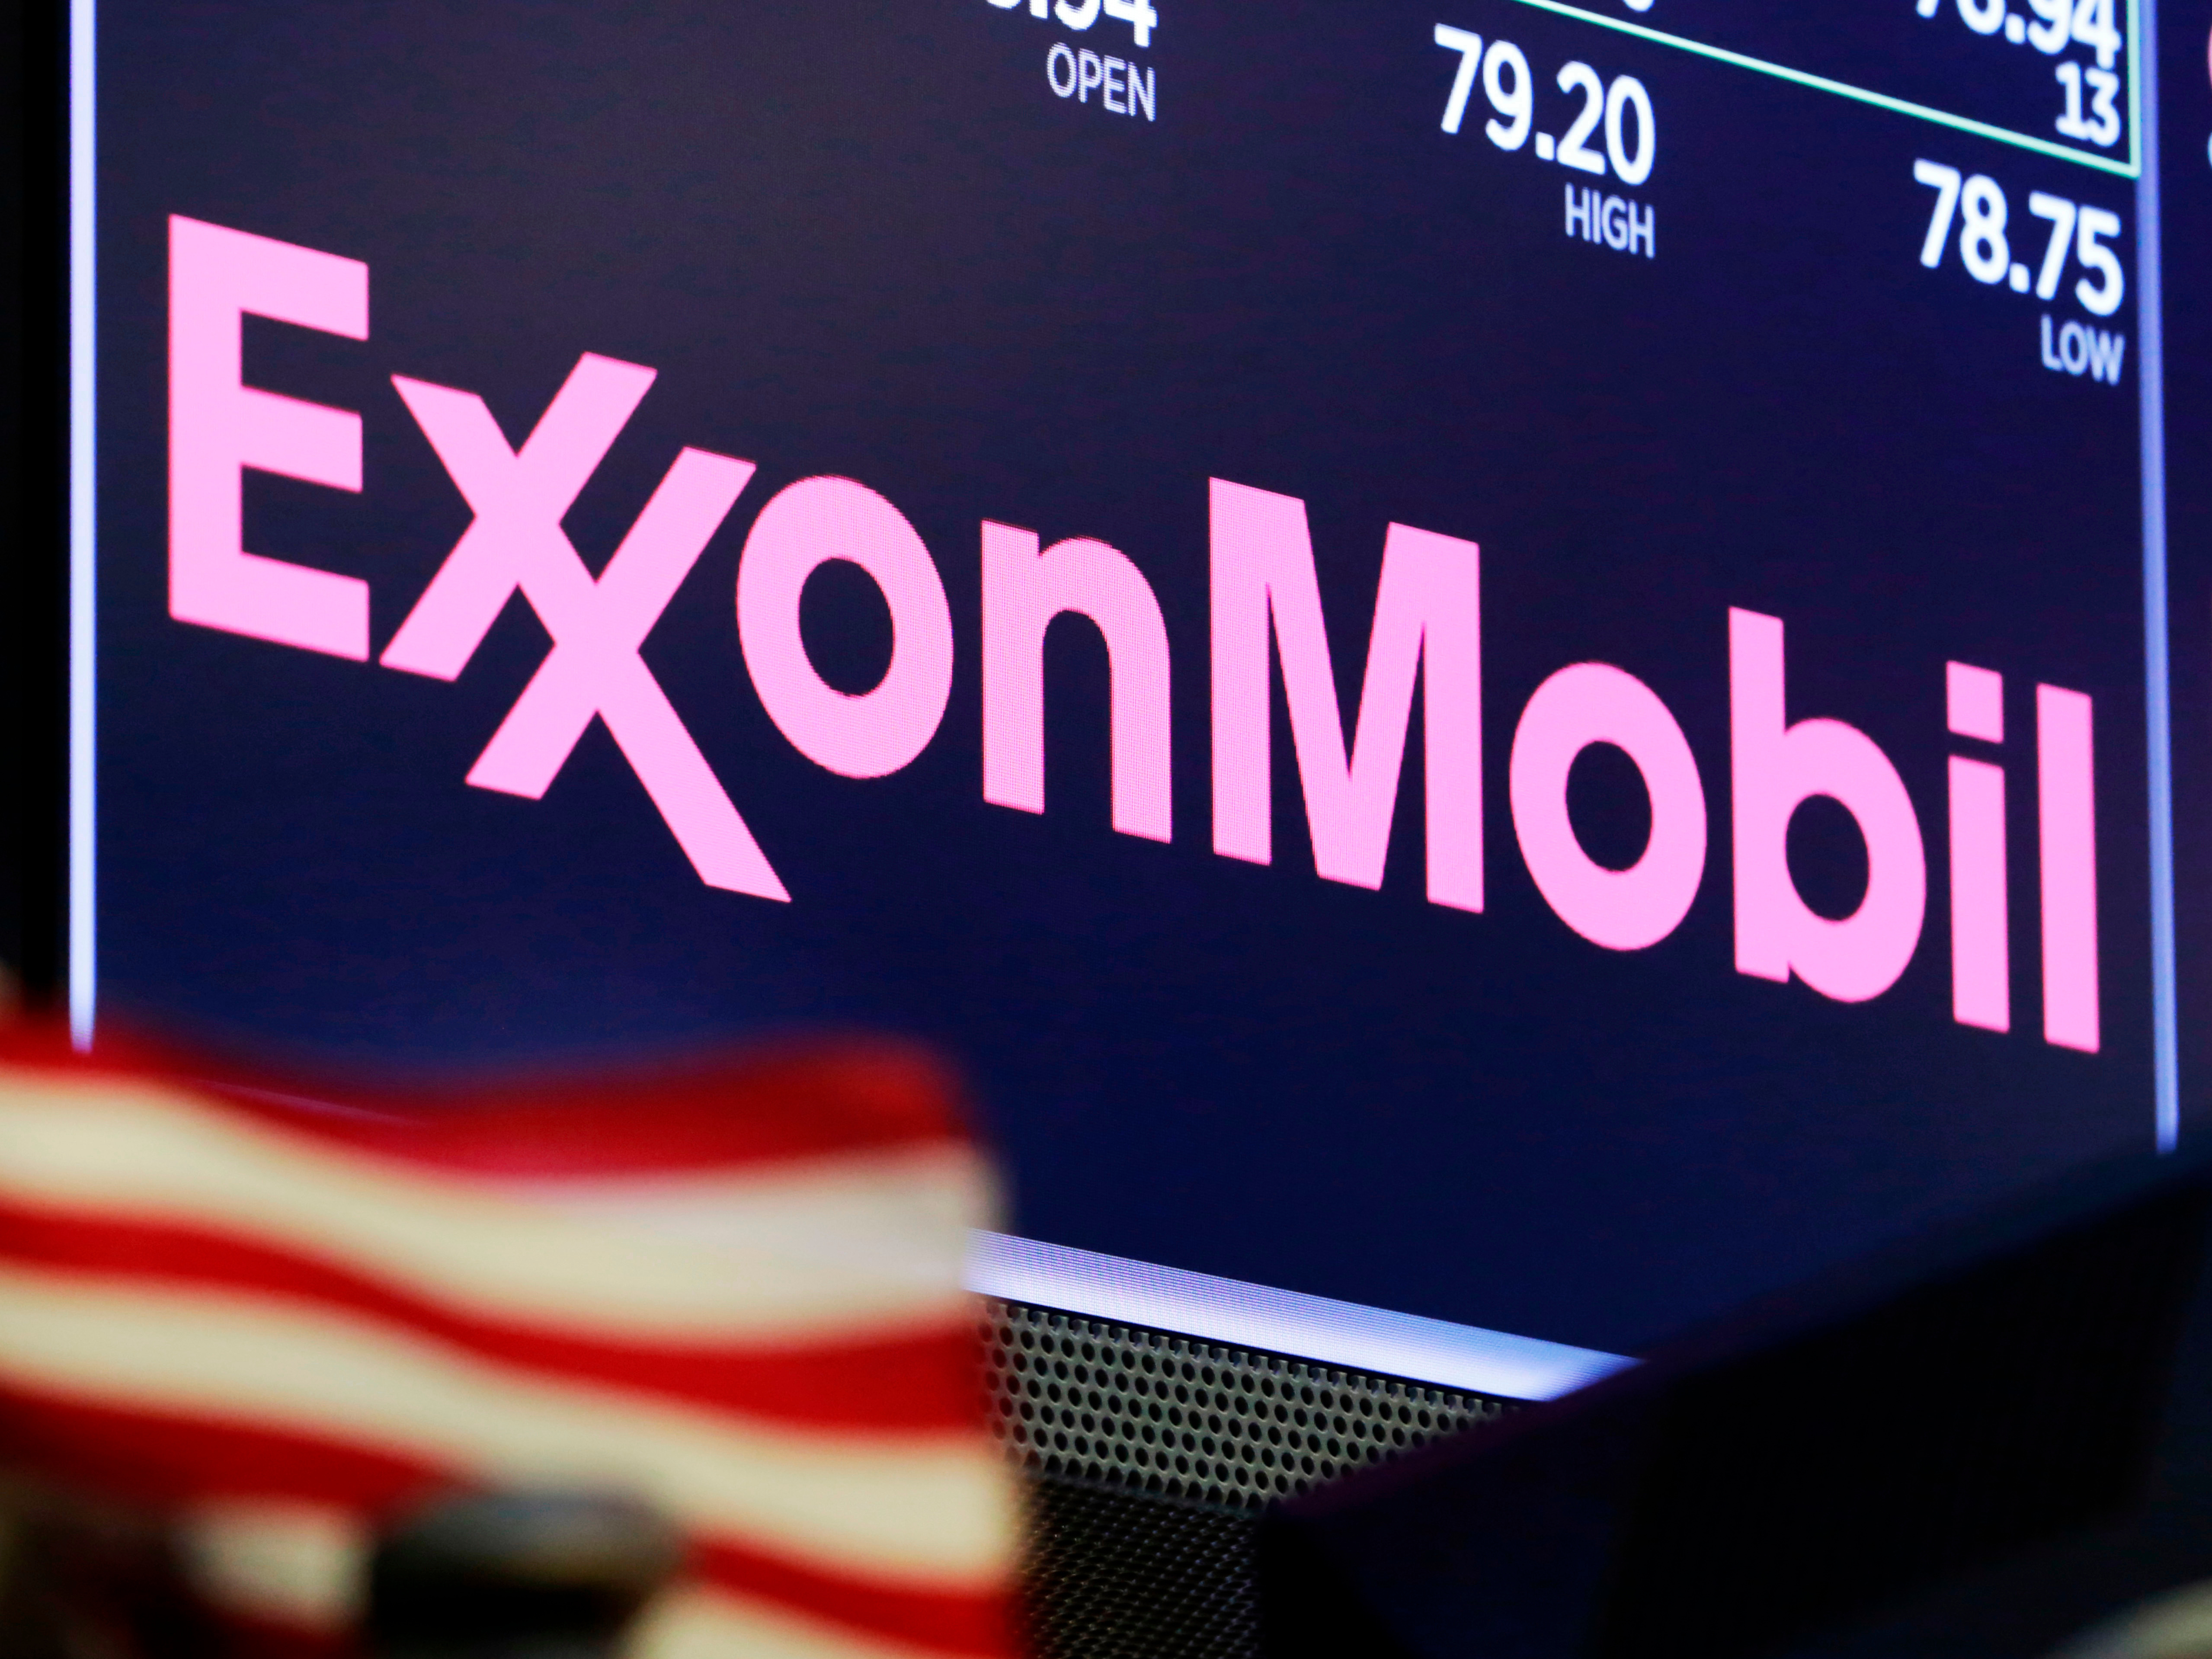 The logo for ExxonMobil above a trading post on the floor of the New York Stock Exchange. The company has apologized after one of its lobbyists talked about undermining climate action in an undercover video. CREDIT: Richard Drew/AP